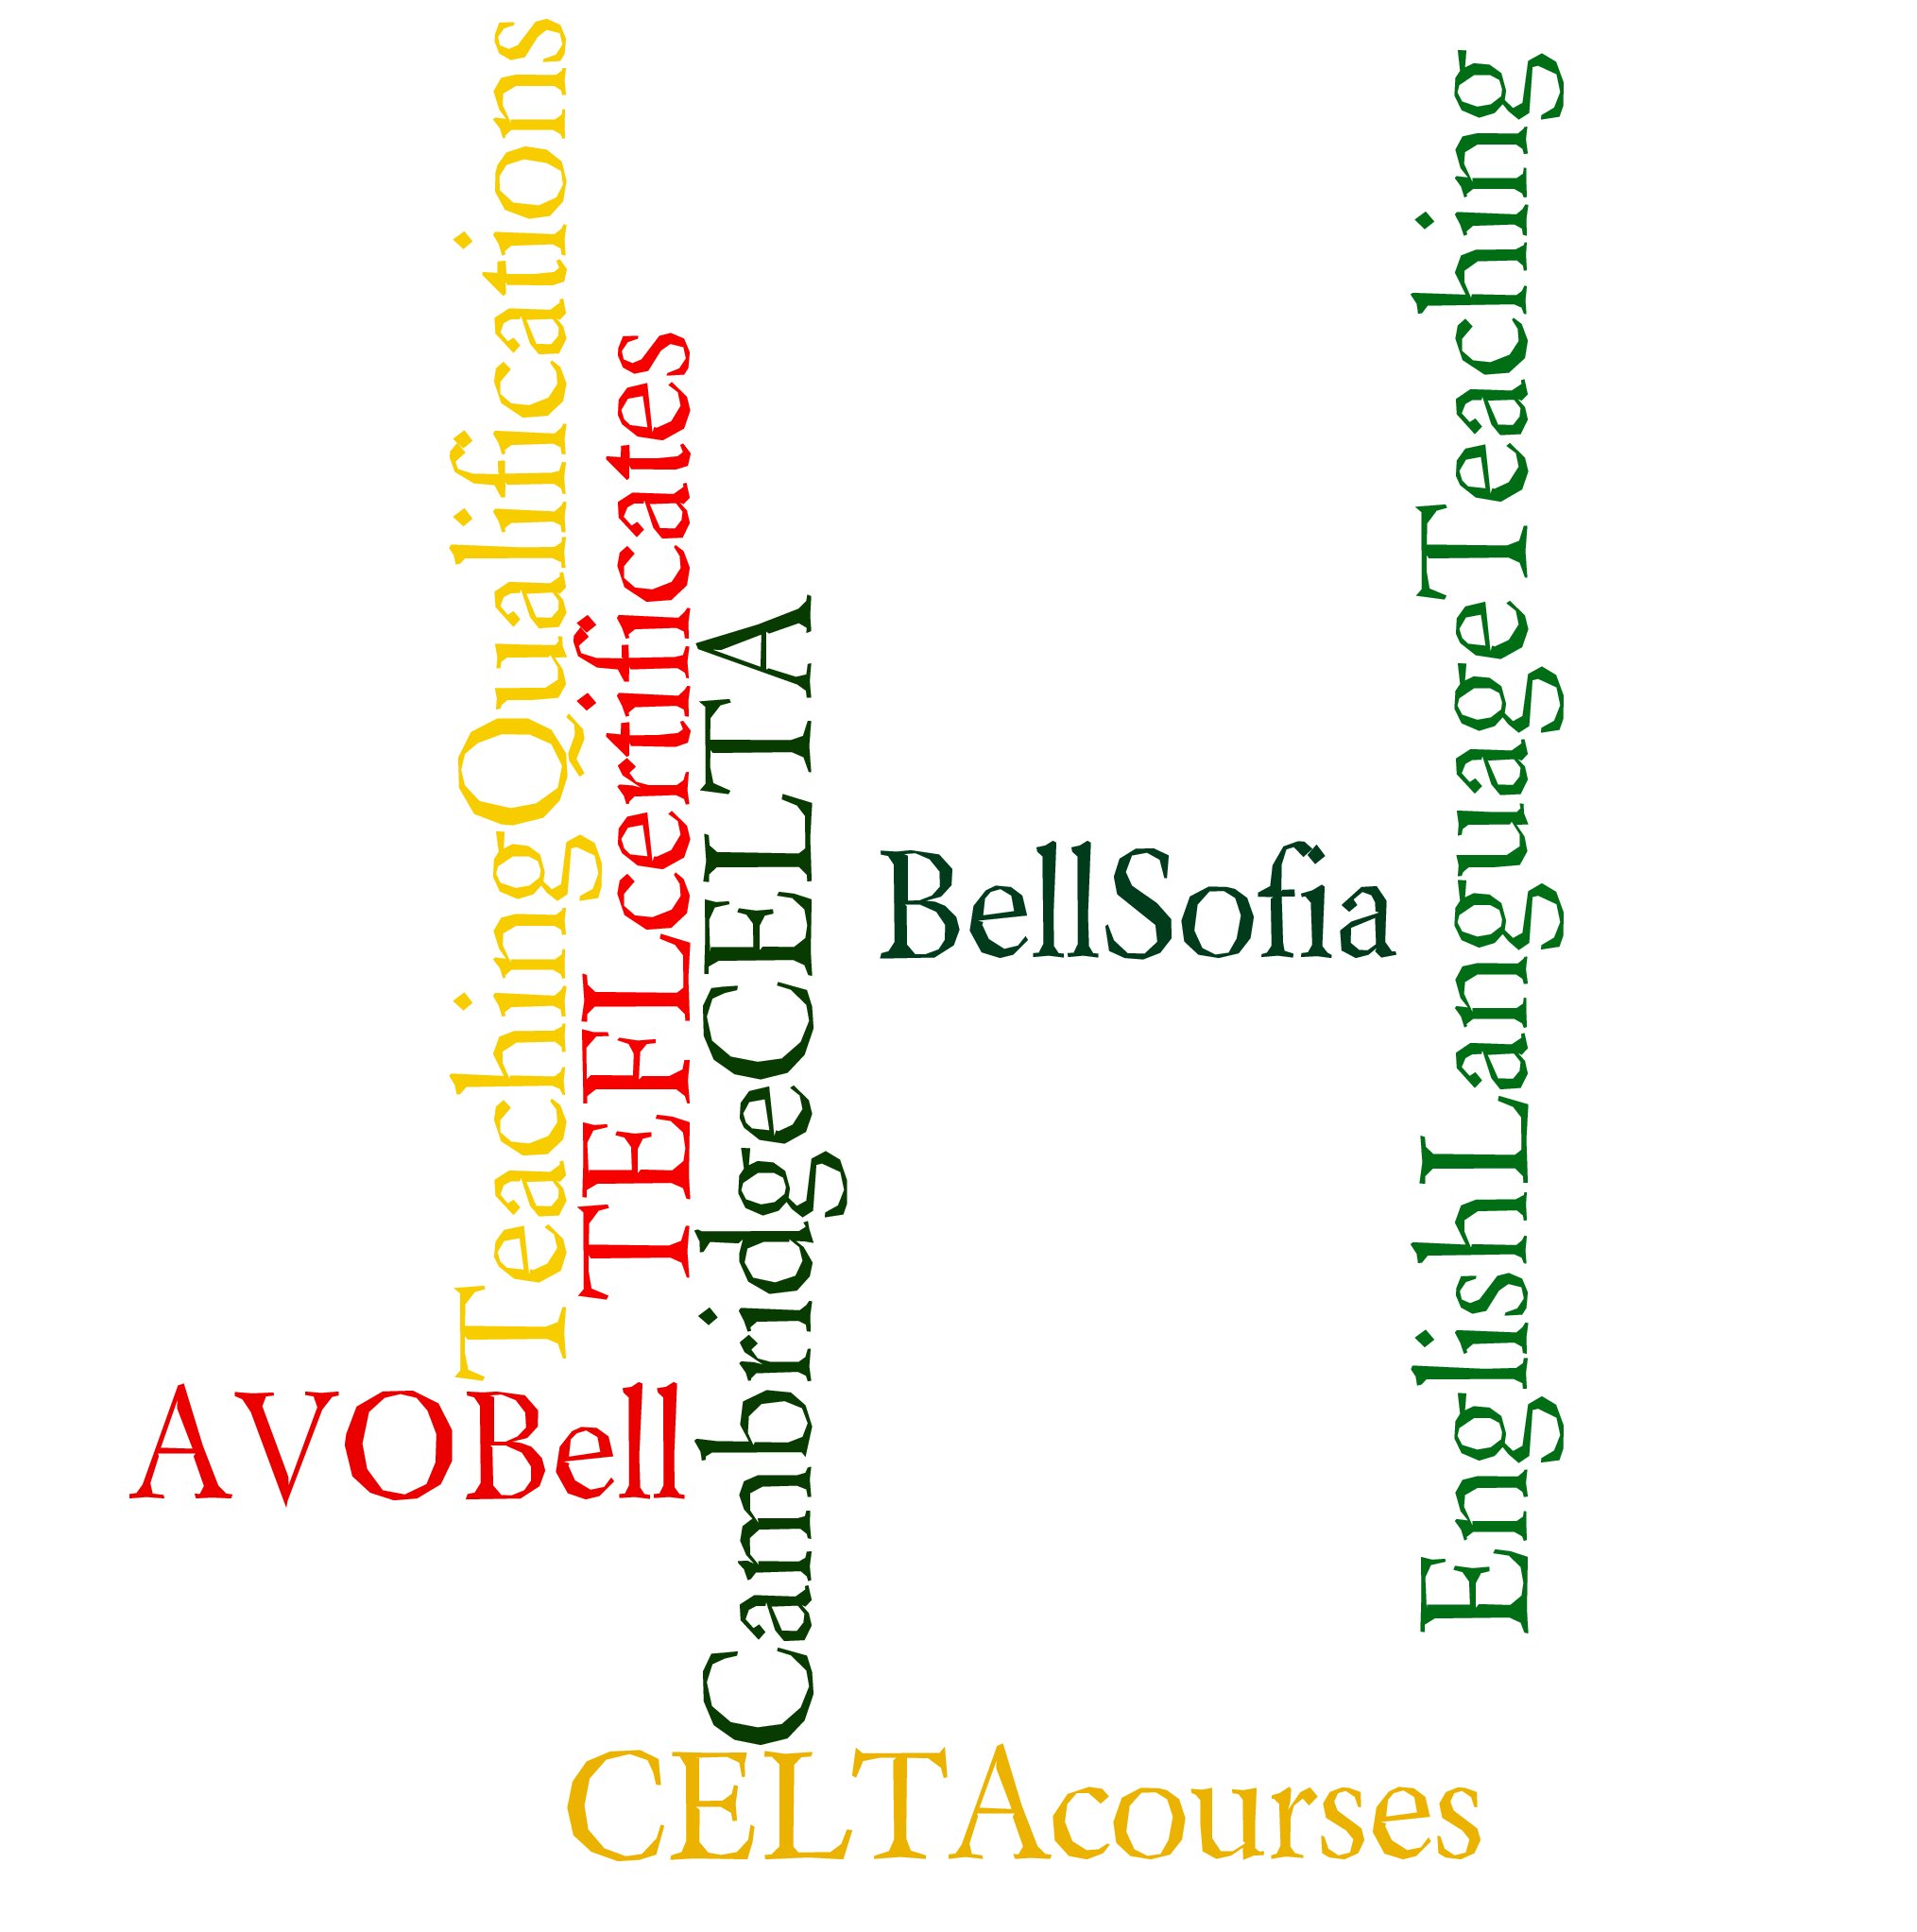 Who can apply for a CELTA course